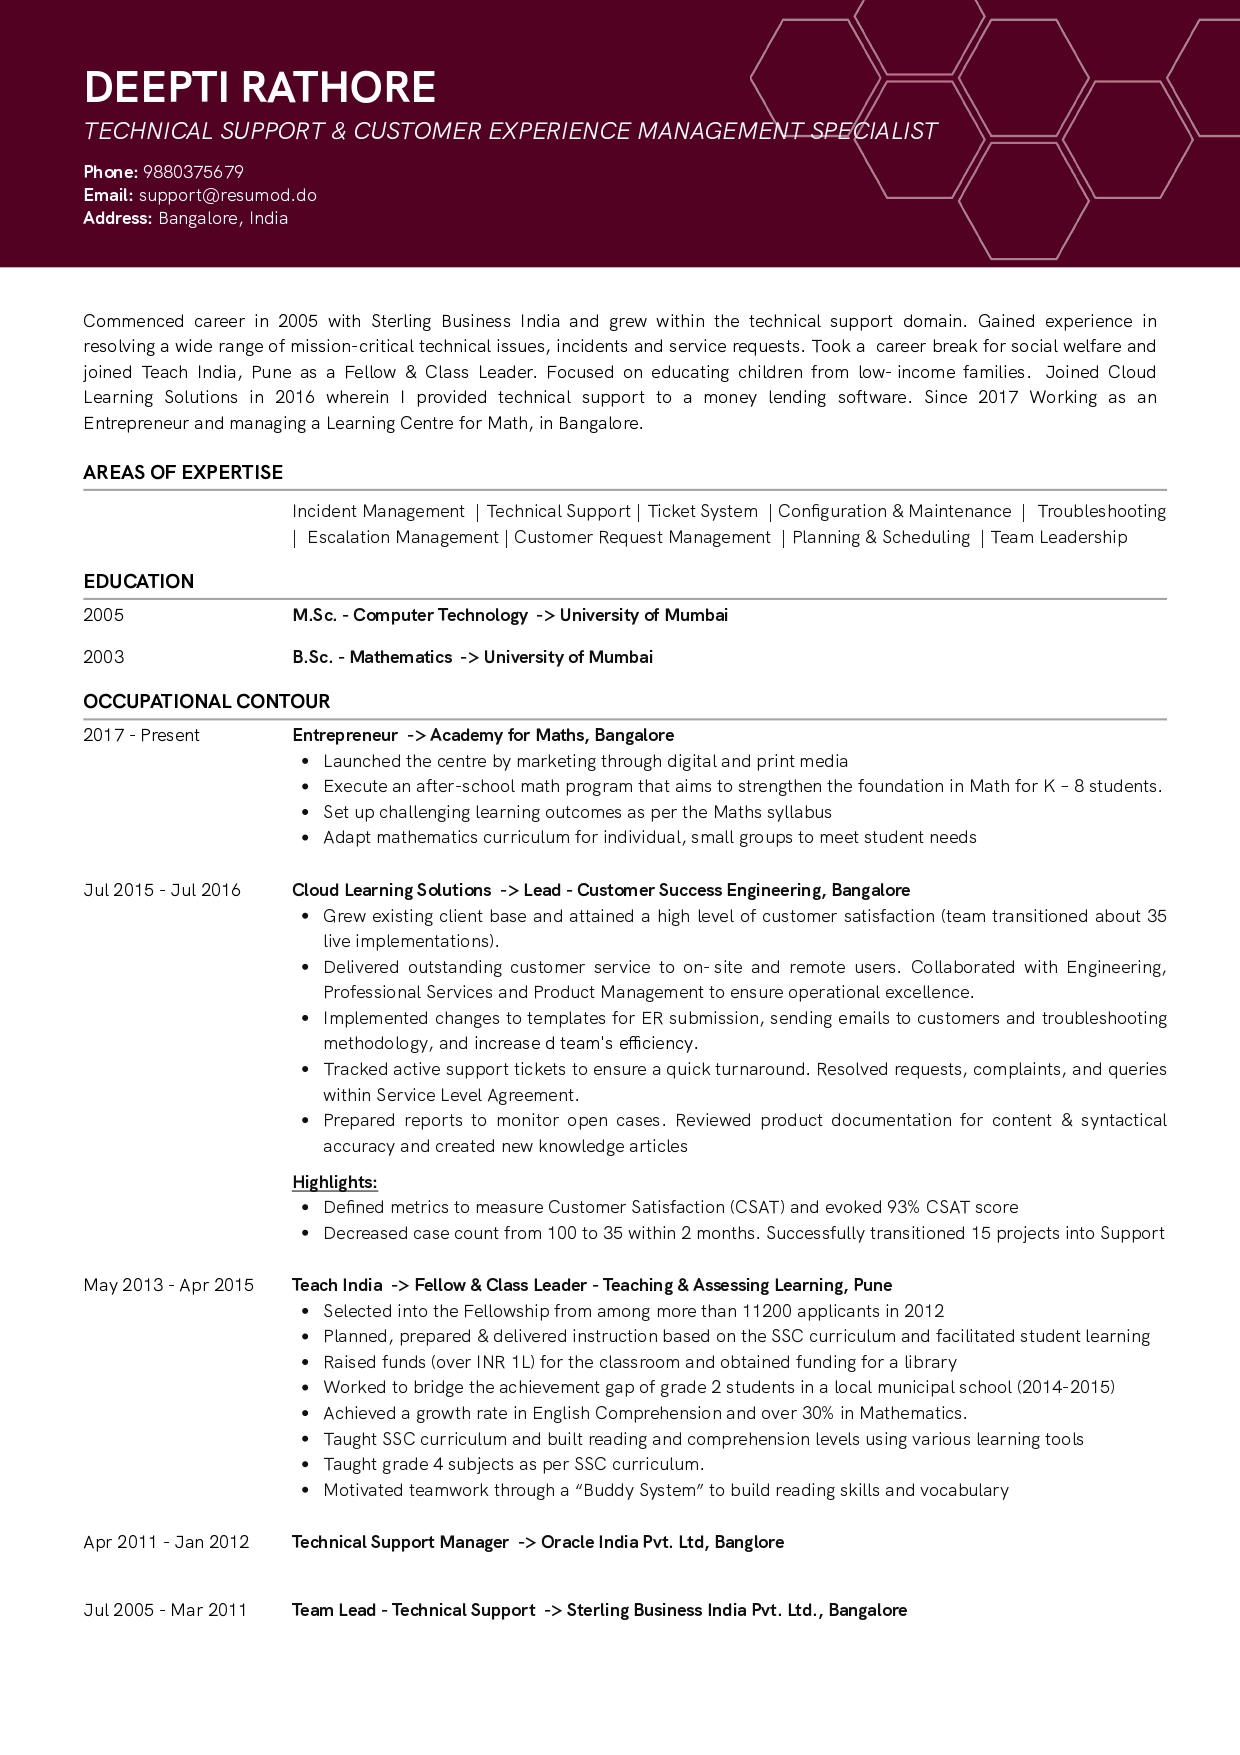 Sample Resume of Technical Support and Customer Success Manager with Career Break | Free Resume Templates & Samples on Resumod.co